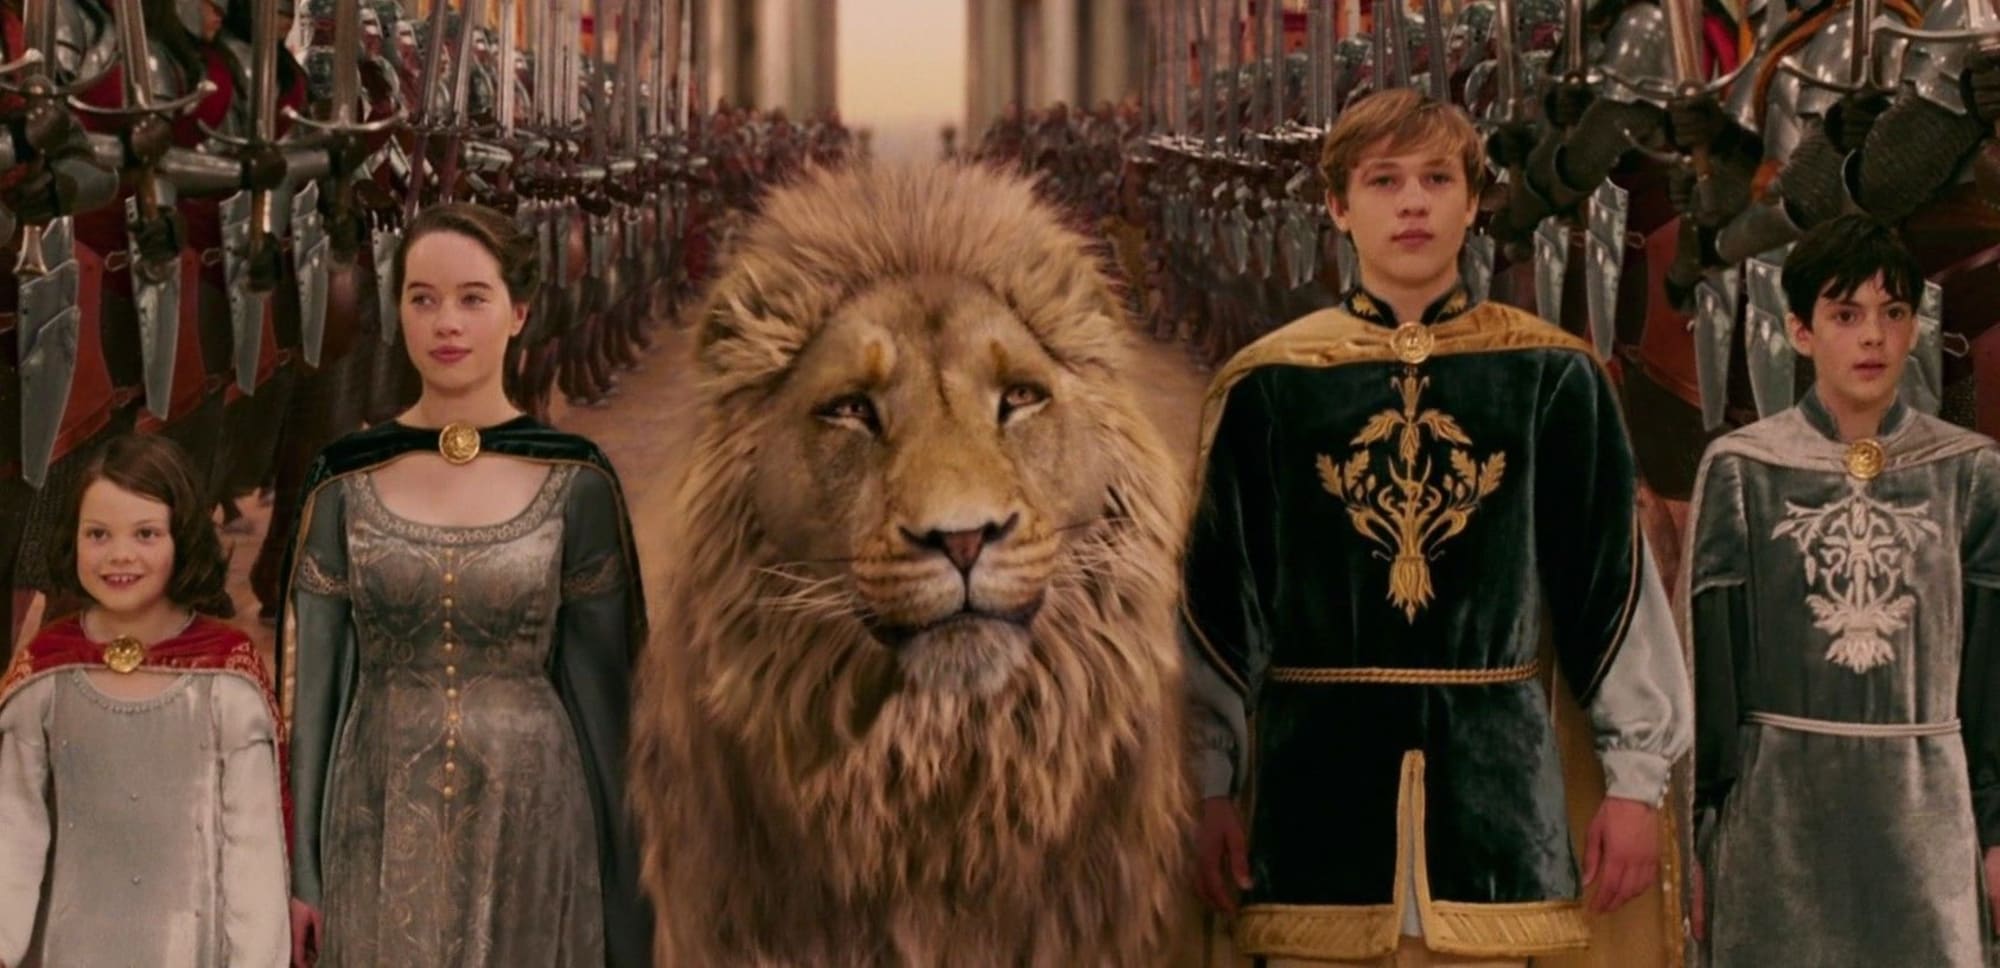 chronicles of narnia 3 movie online